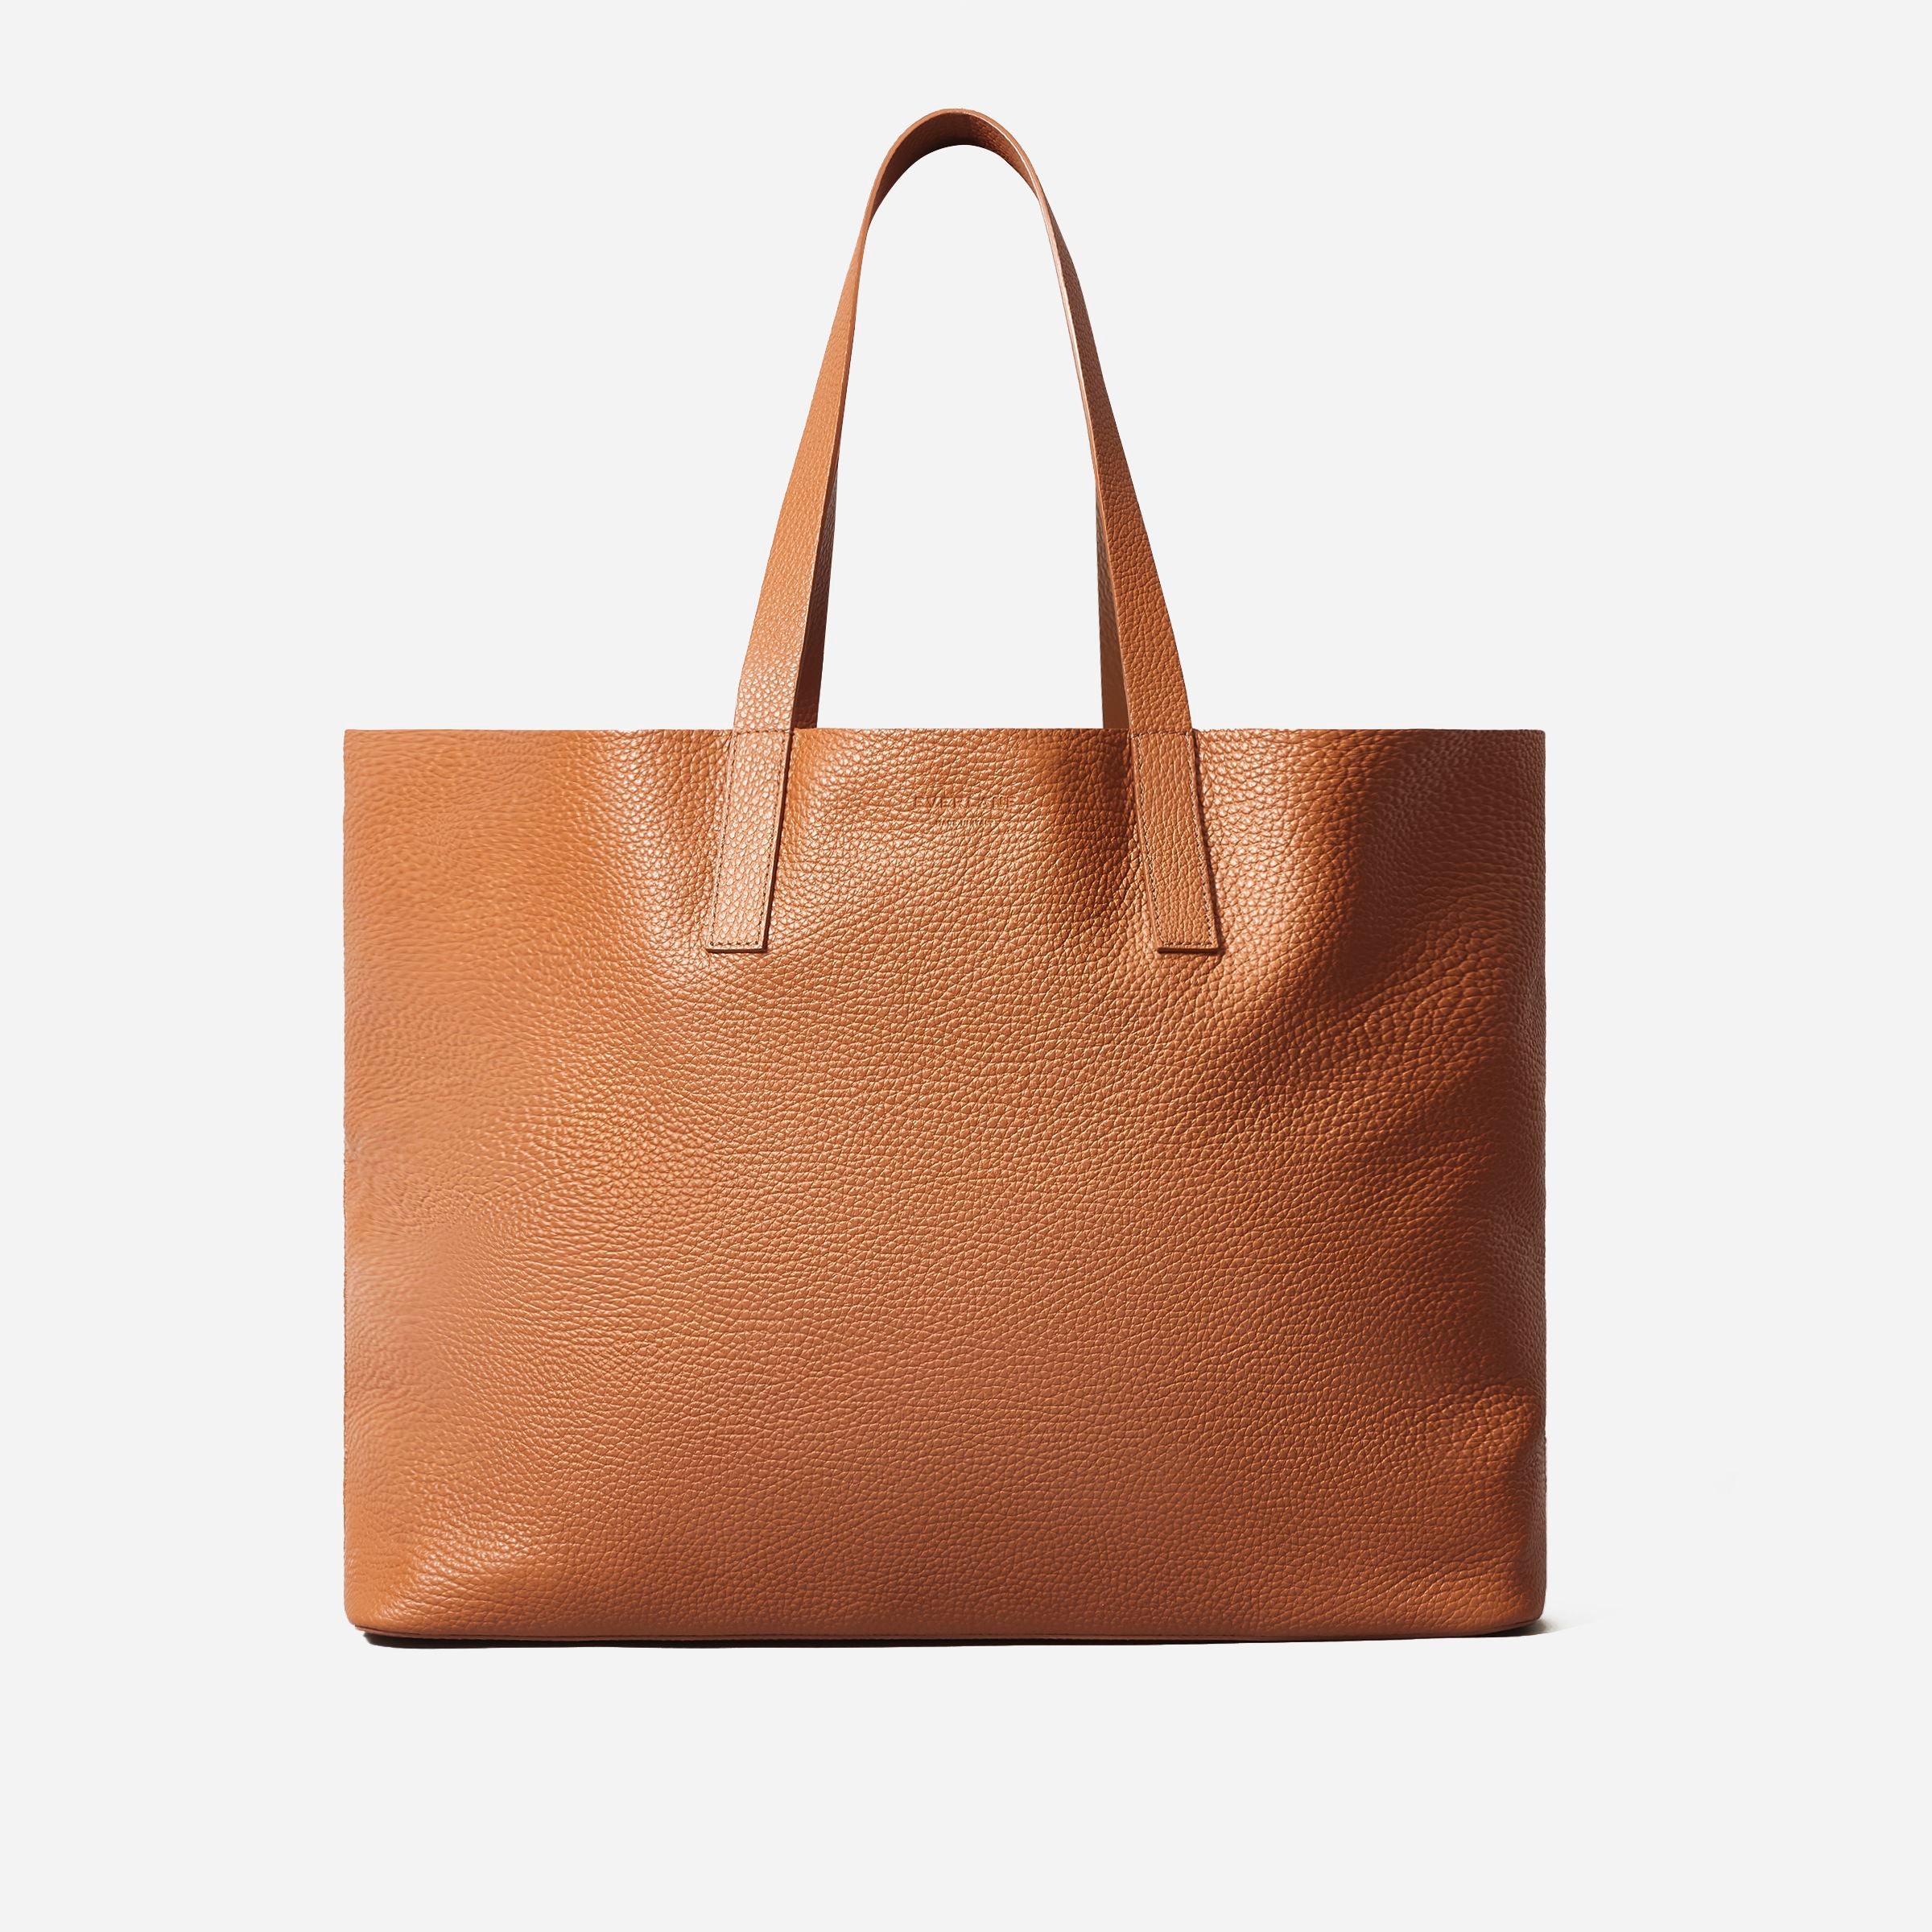 Everlane + The Soft Day Tote